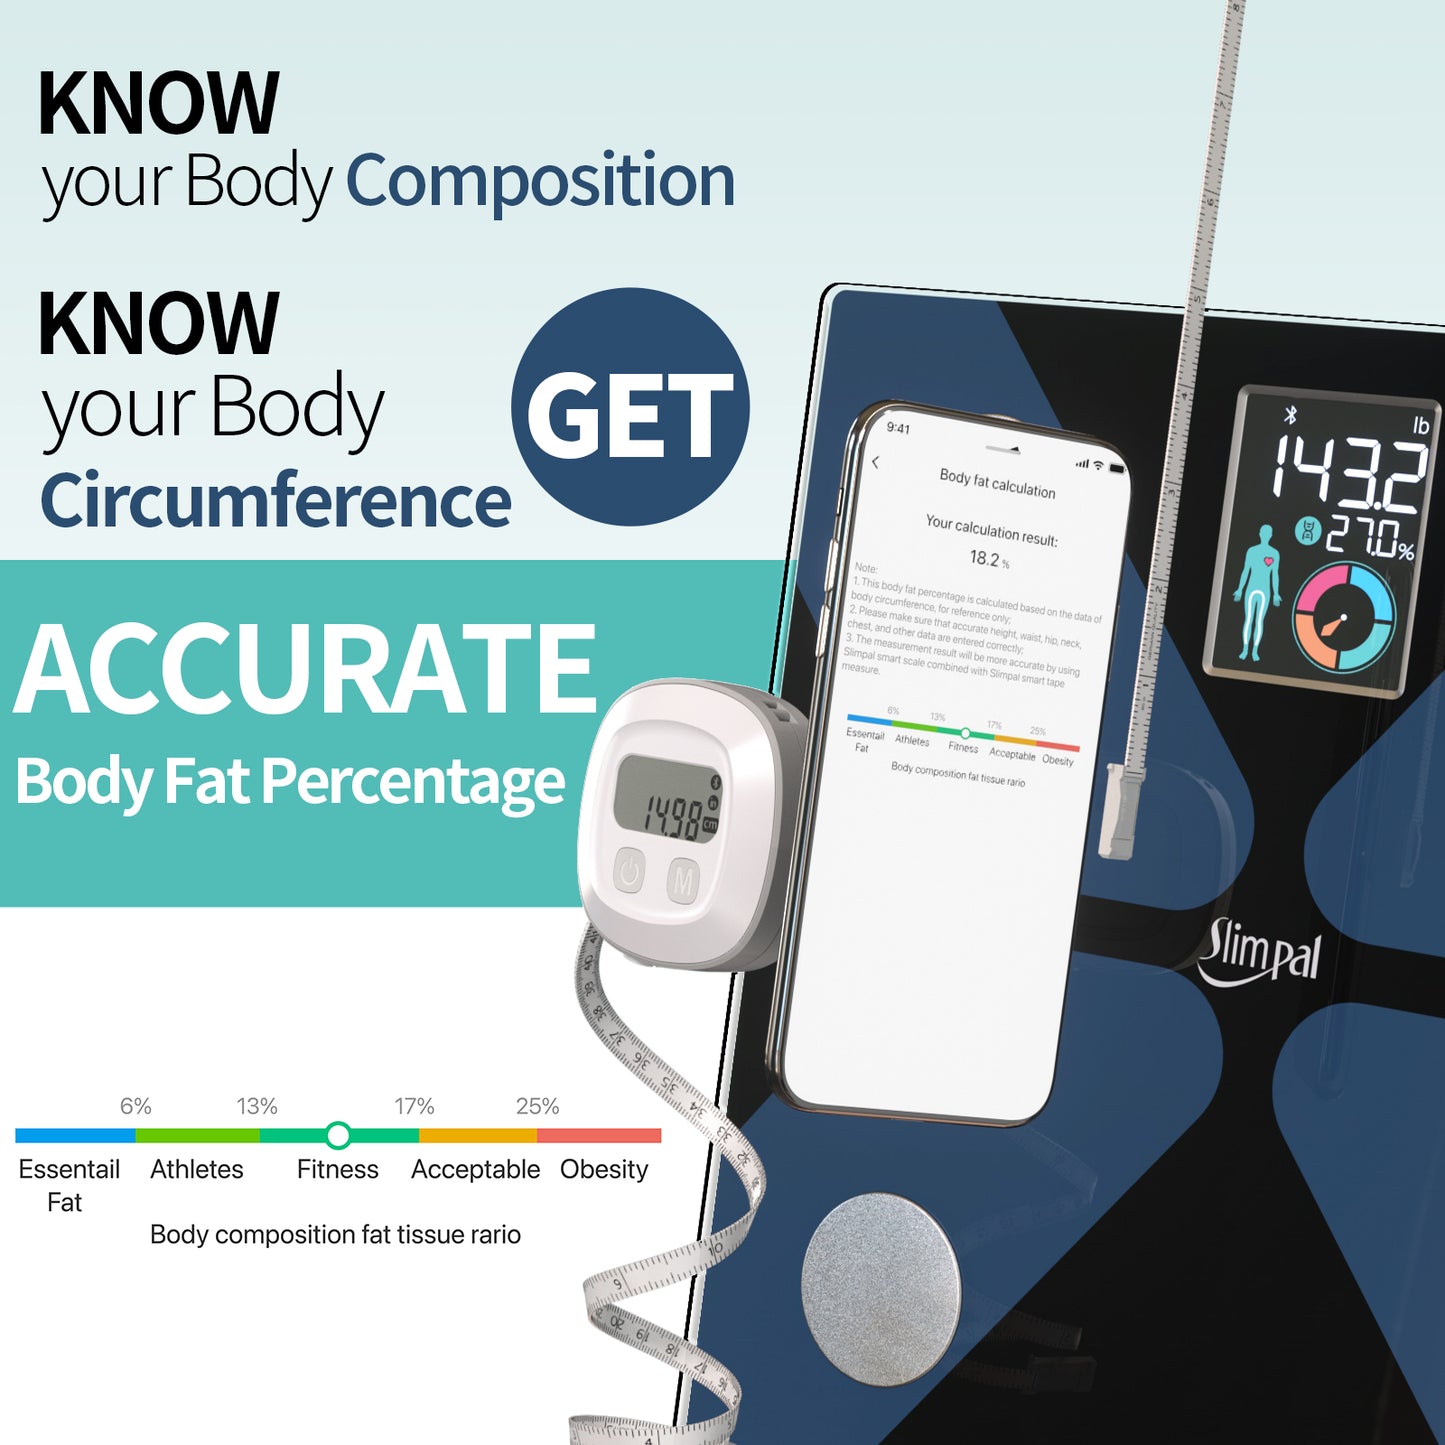 Slimpal Body Fat Measuring Tape and Smart Scale, App Controled, Weight Loss, Body Composition and Circumference Analyzer